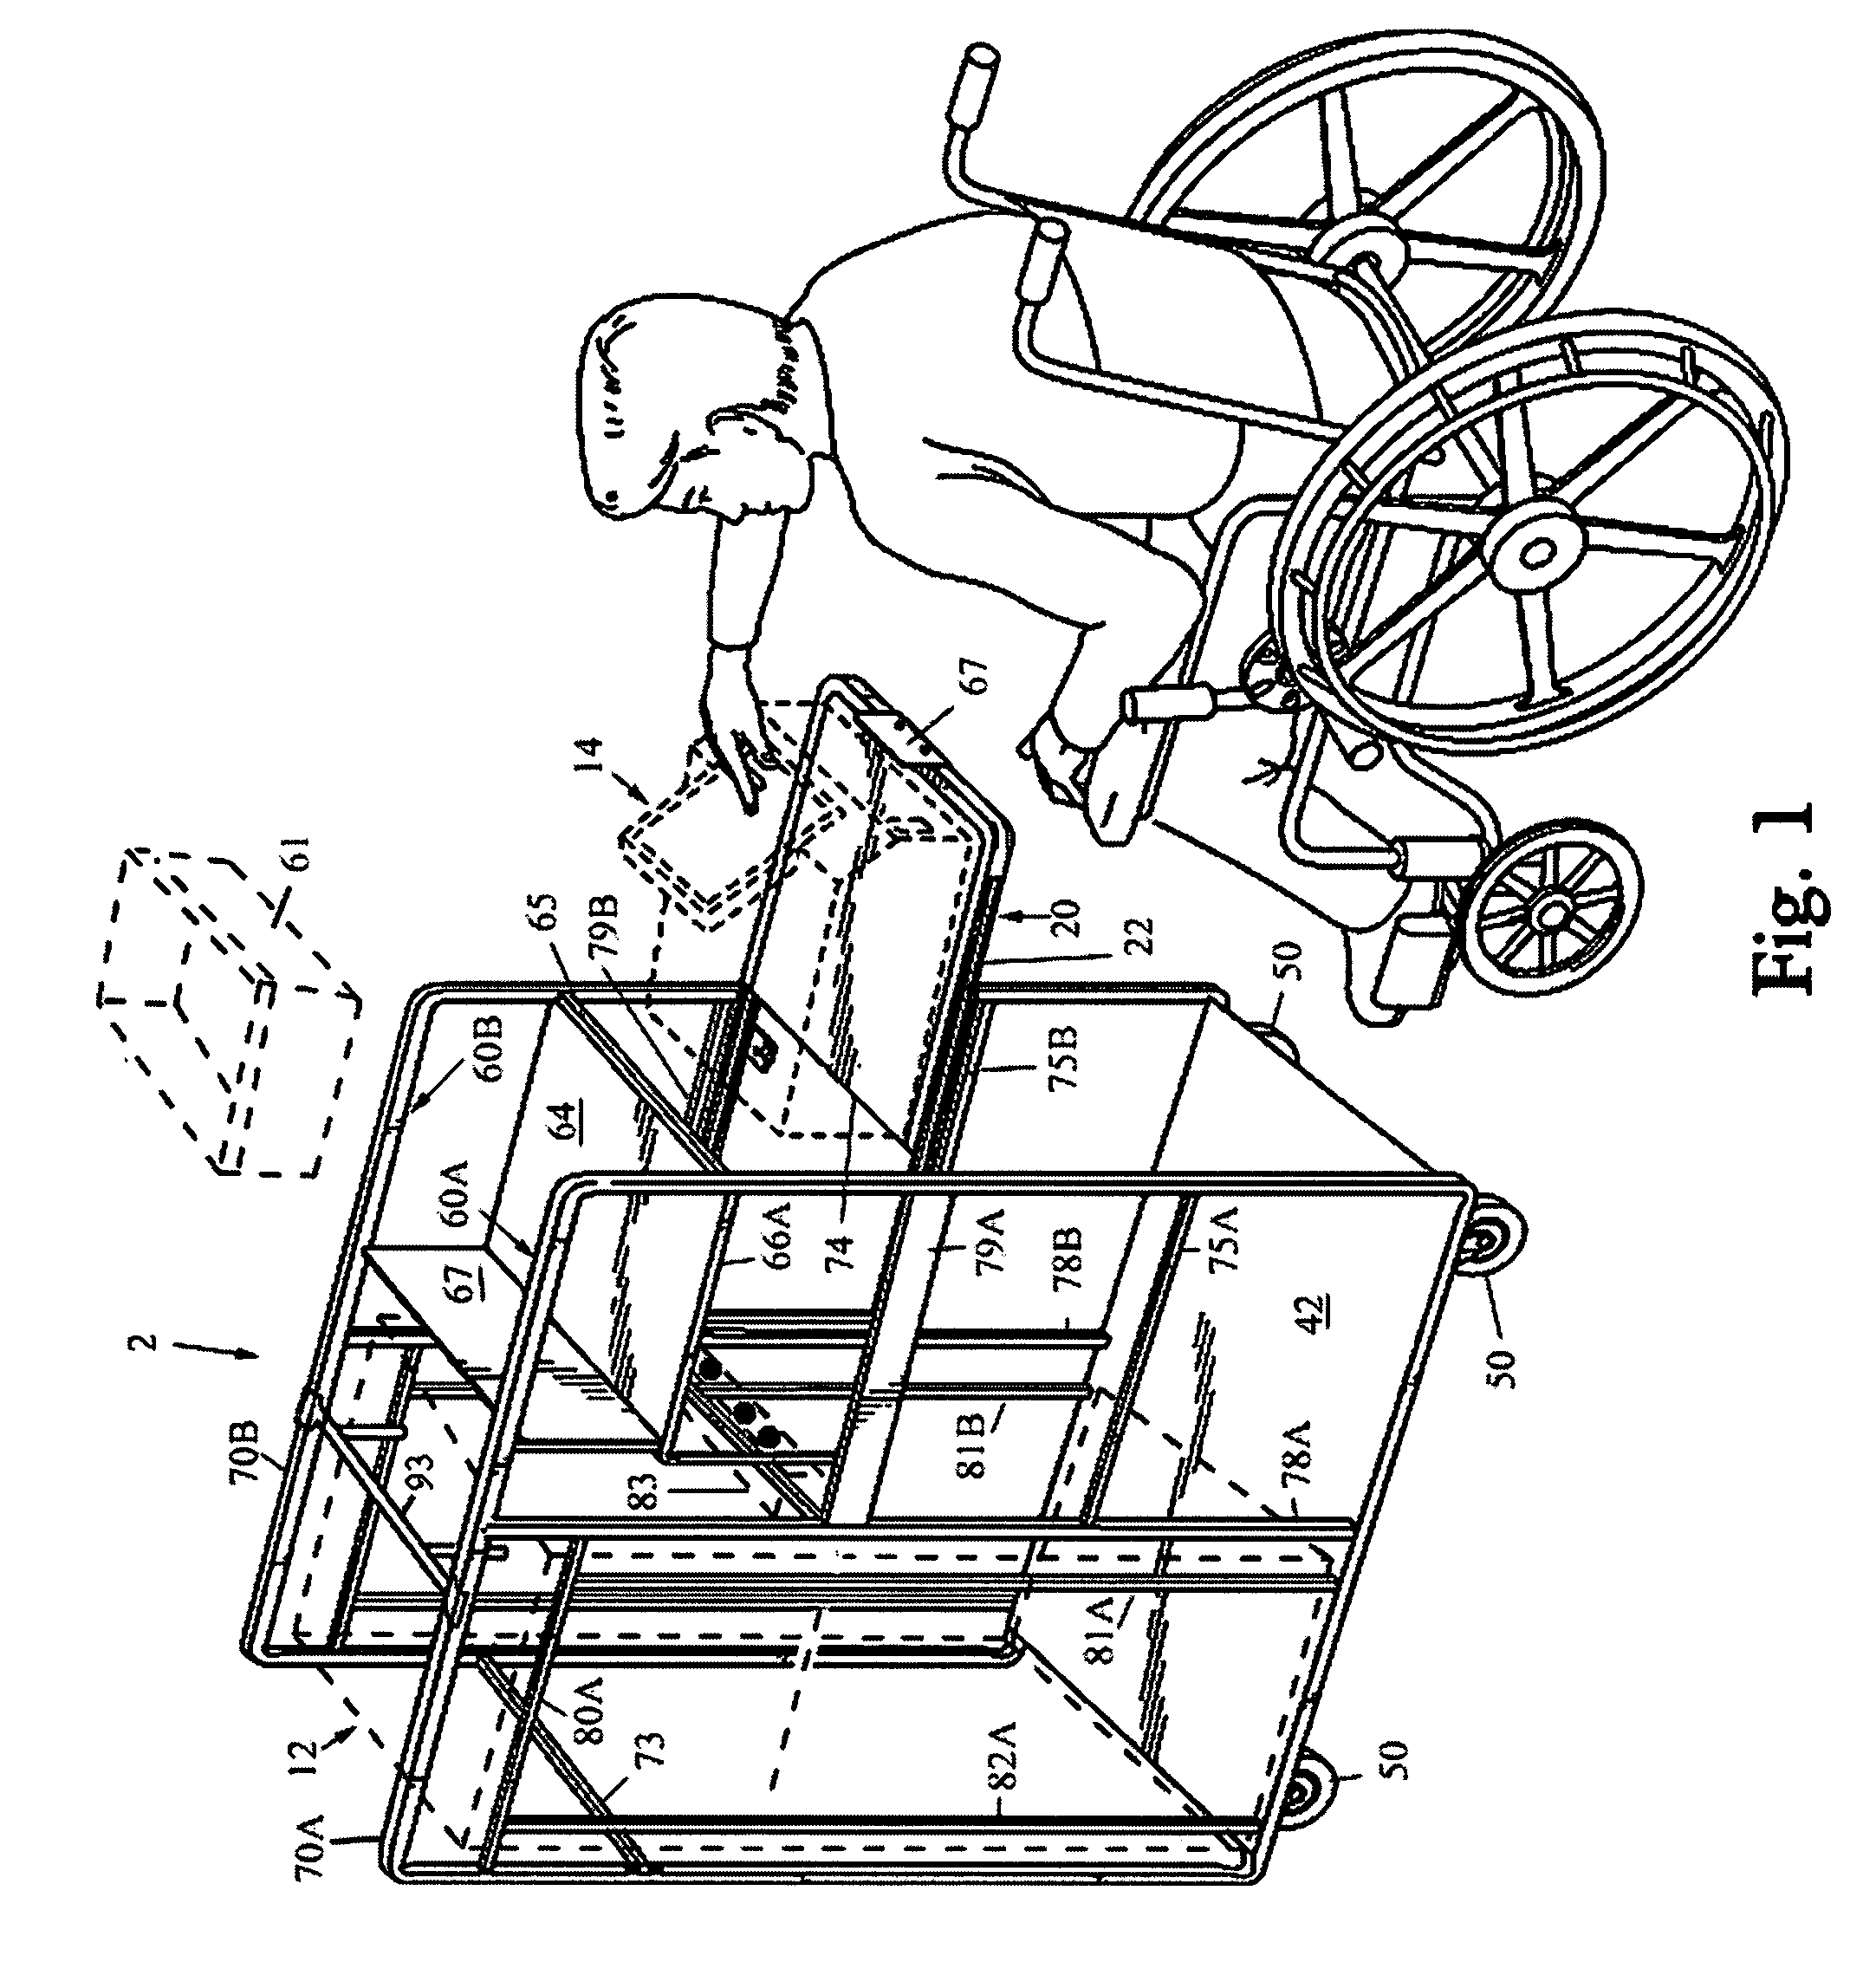 Voting machine storage and transport cart with improved security